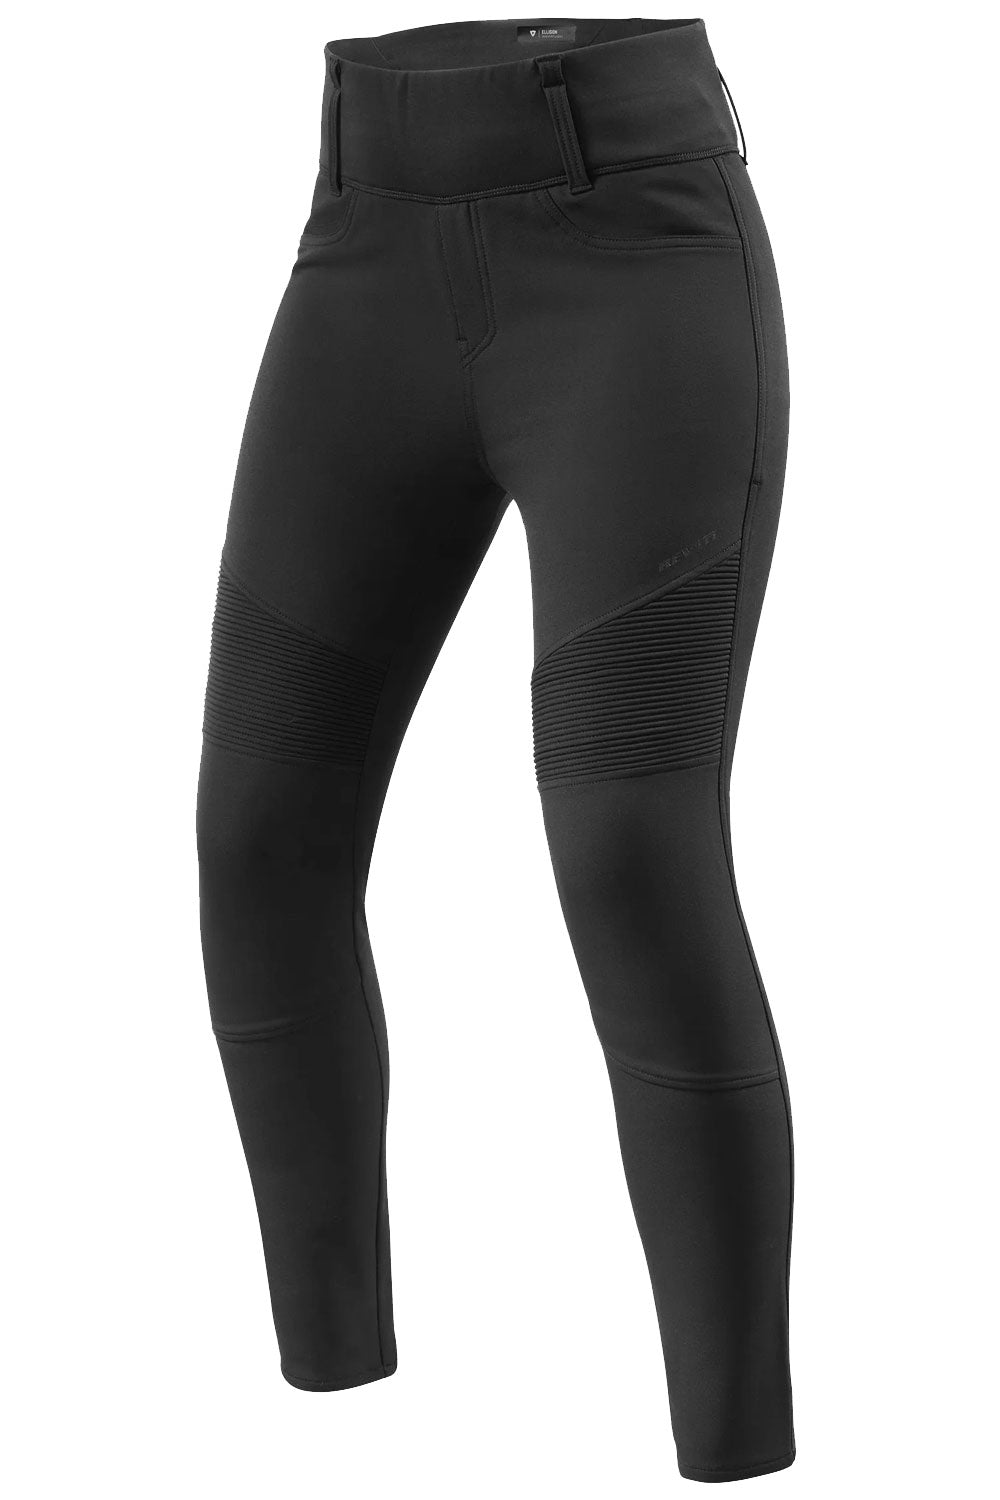 Bronte - Women's AA rated motorcycle leggings with stretch